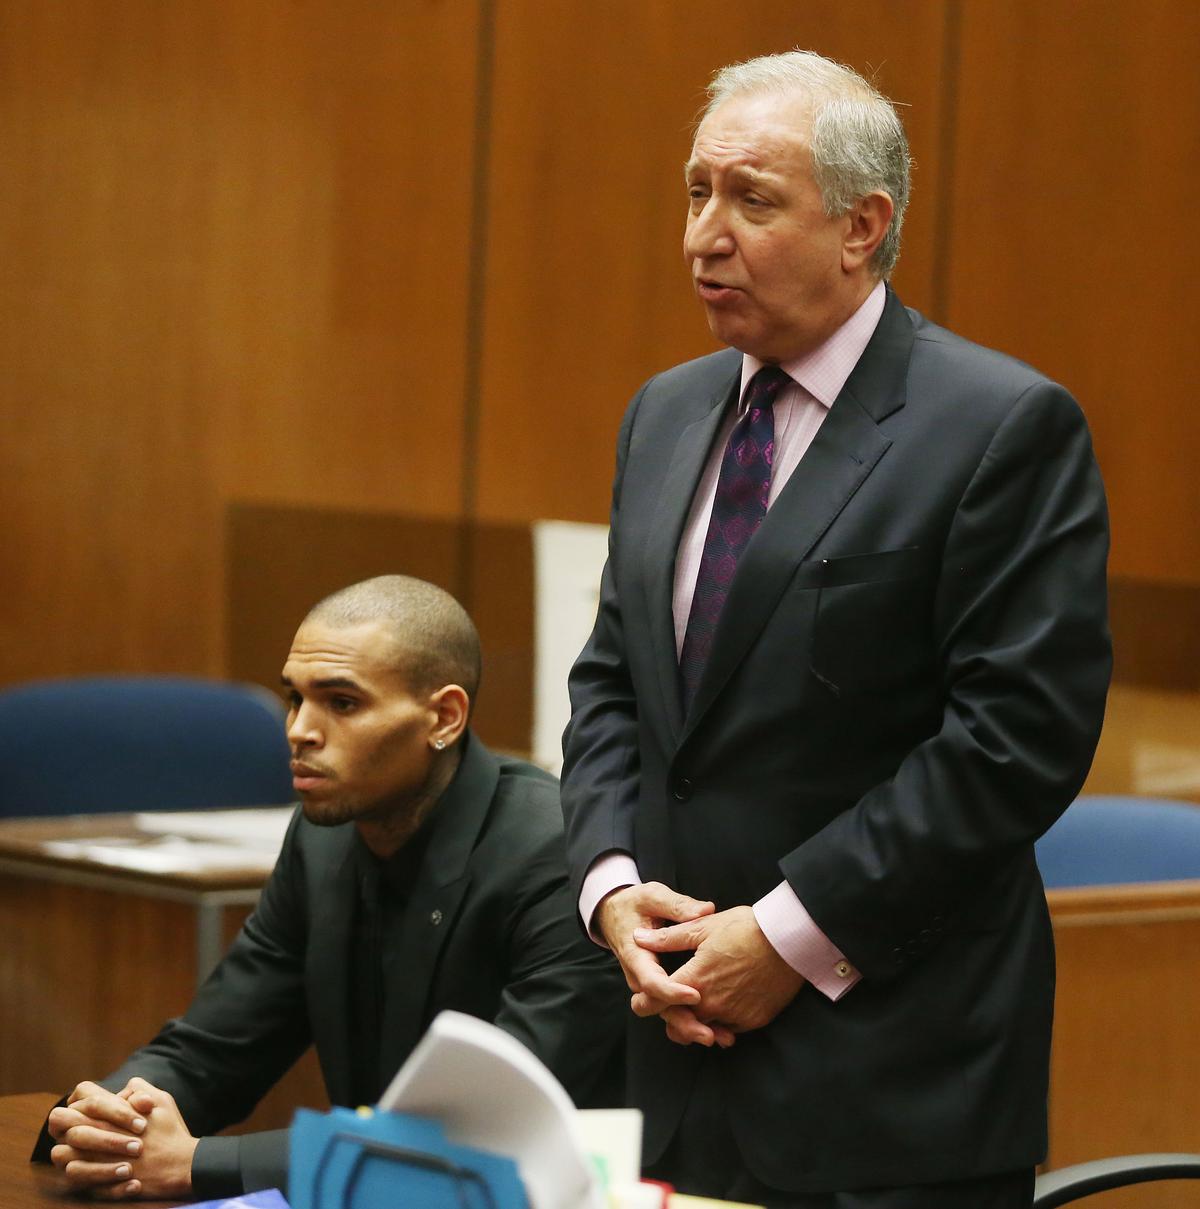 Recording artist Chris Brown (L) and his attorney Mark Geragos appear in Los Angeles court in Los Angeles, California, on Nov. 20, 2013. (Frederick M. Brown/Getty Images)